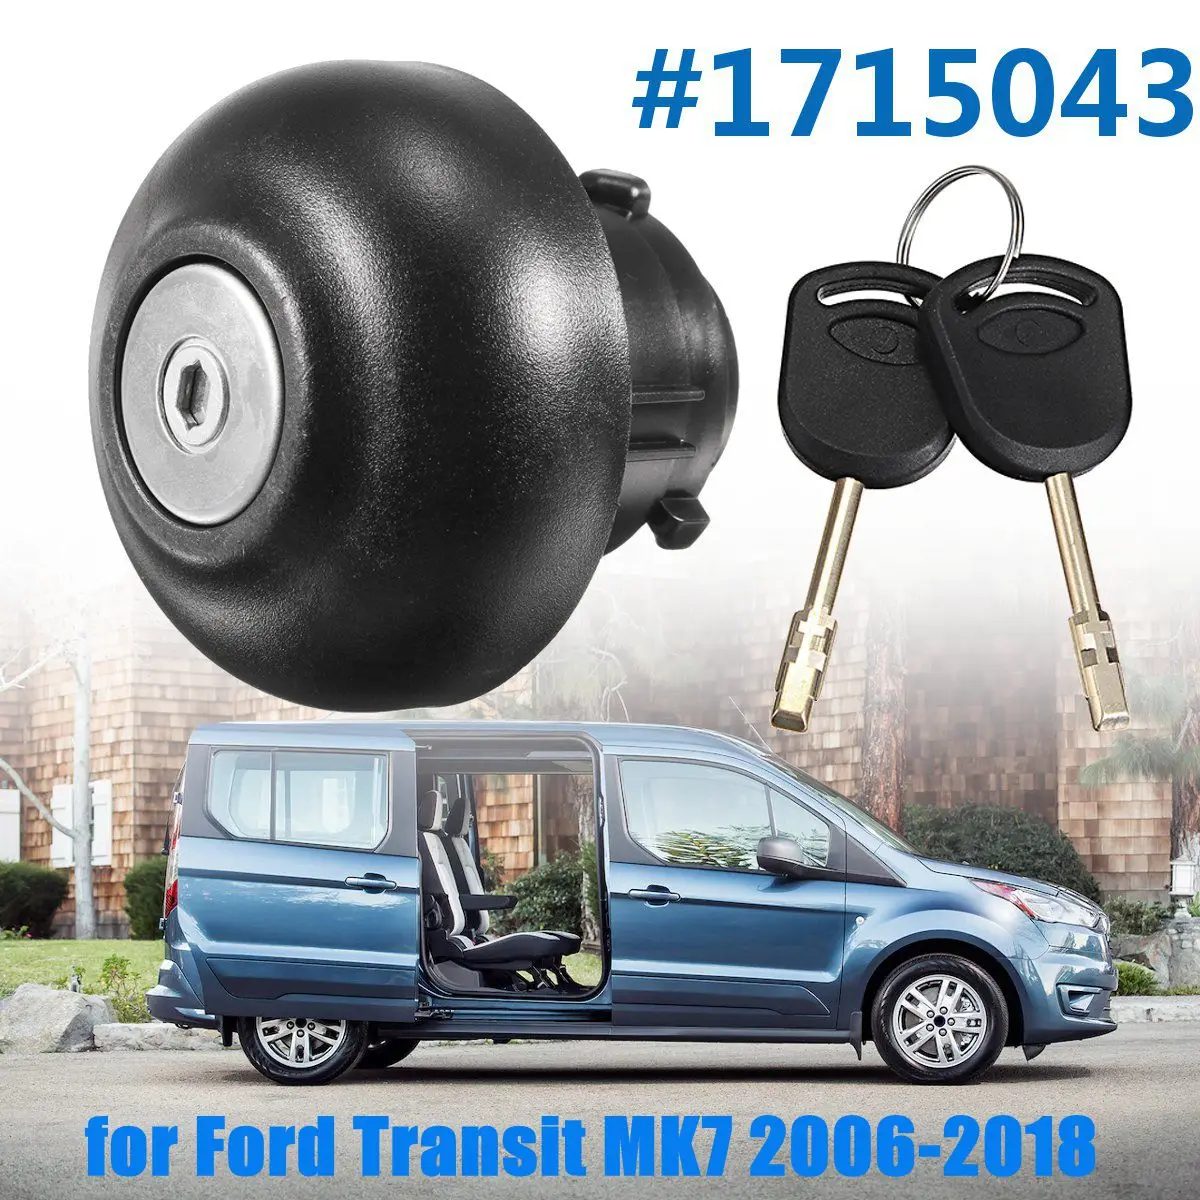 

#1715043 Locking Fuel Cap With Two Keys For Ford Transit MK7 2006 2007 2008 2009 2010 2011 2012 2013 2014 2015 2016 20172018